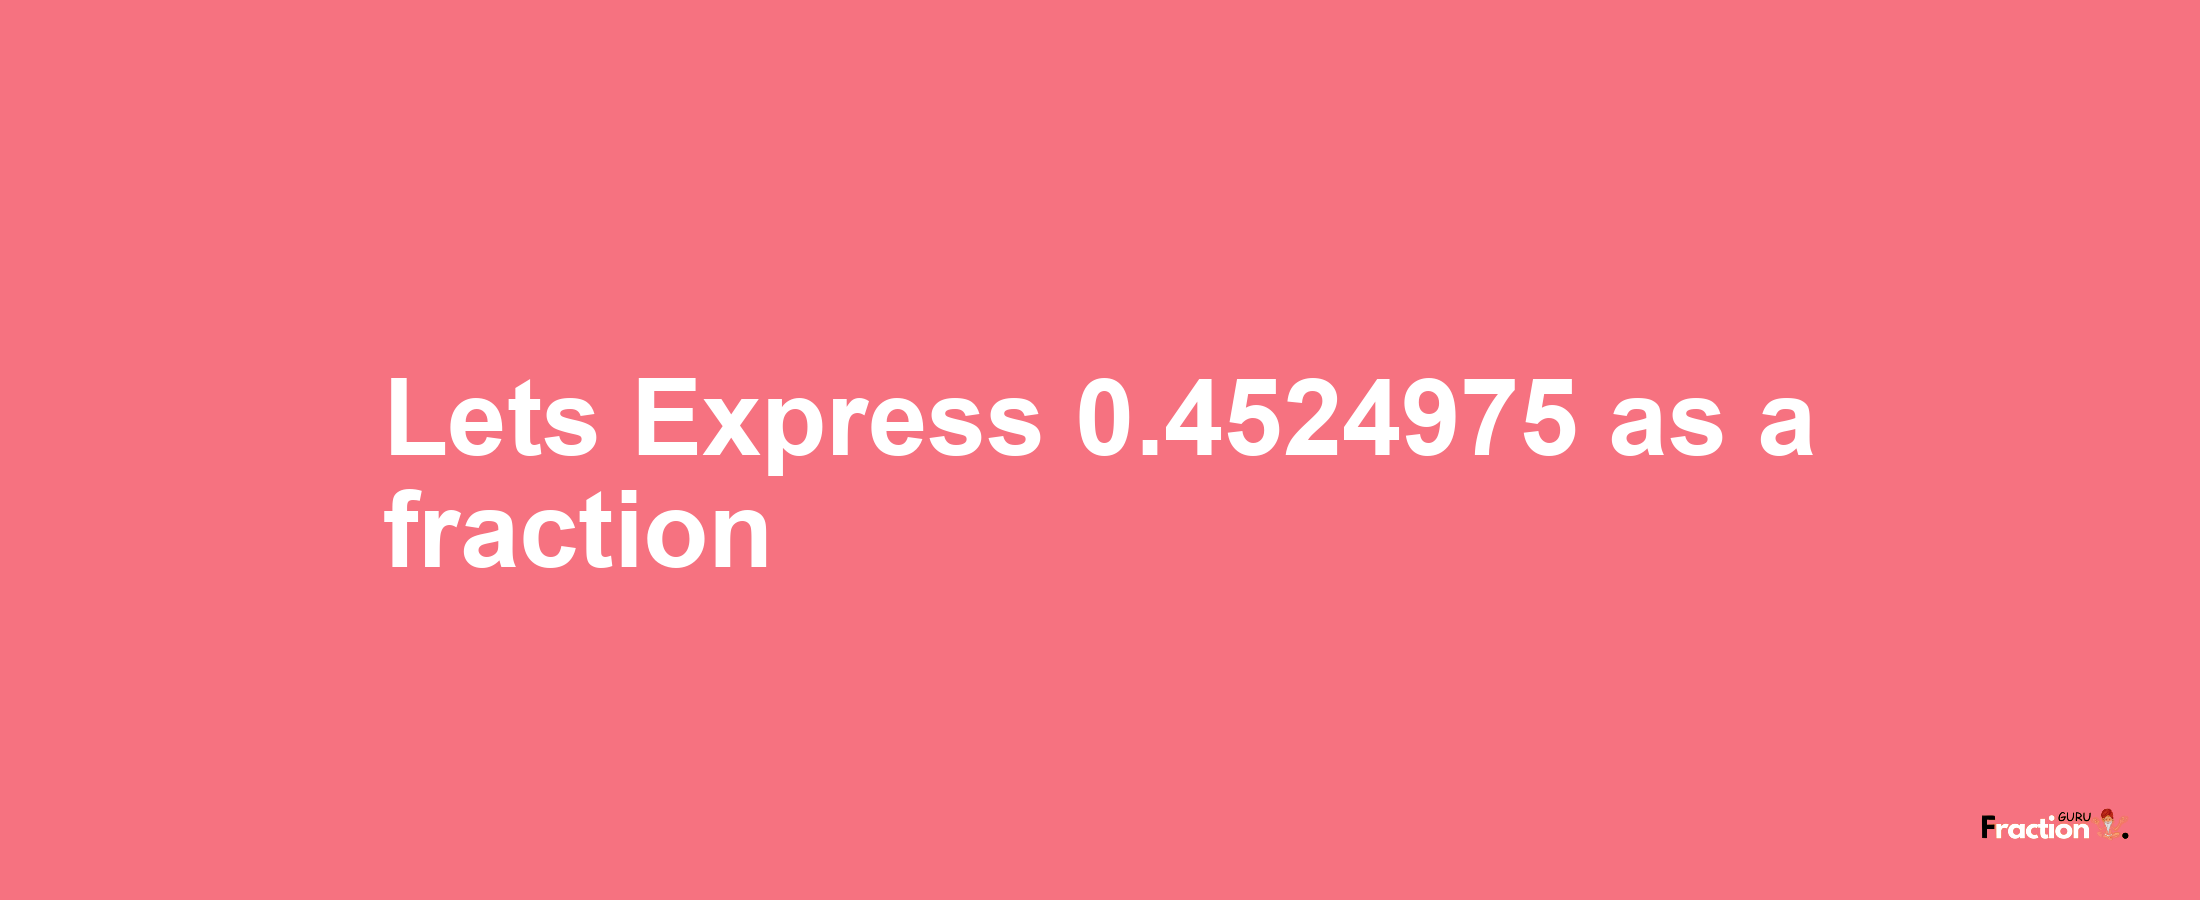 Lets Express 0.4524975 as afraction